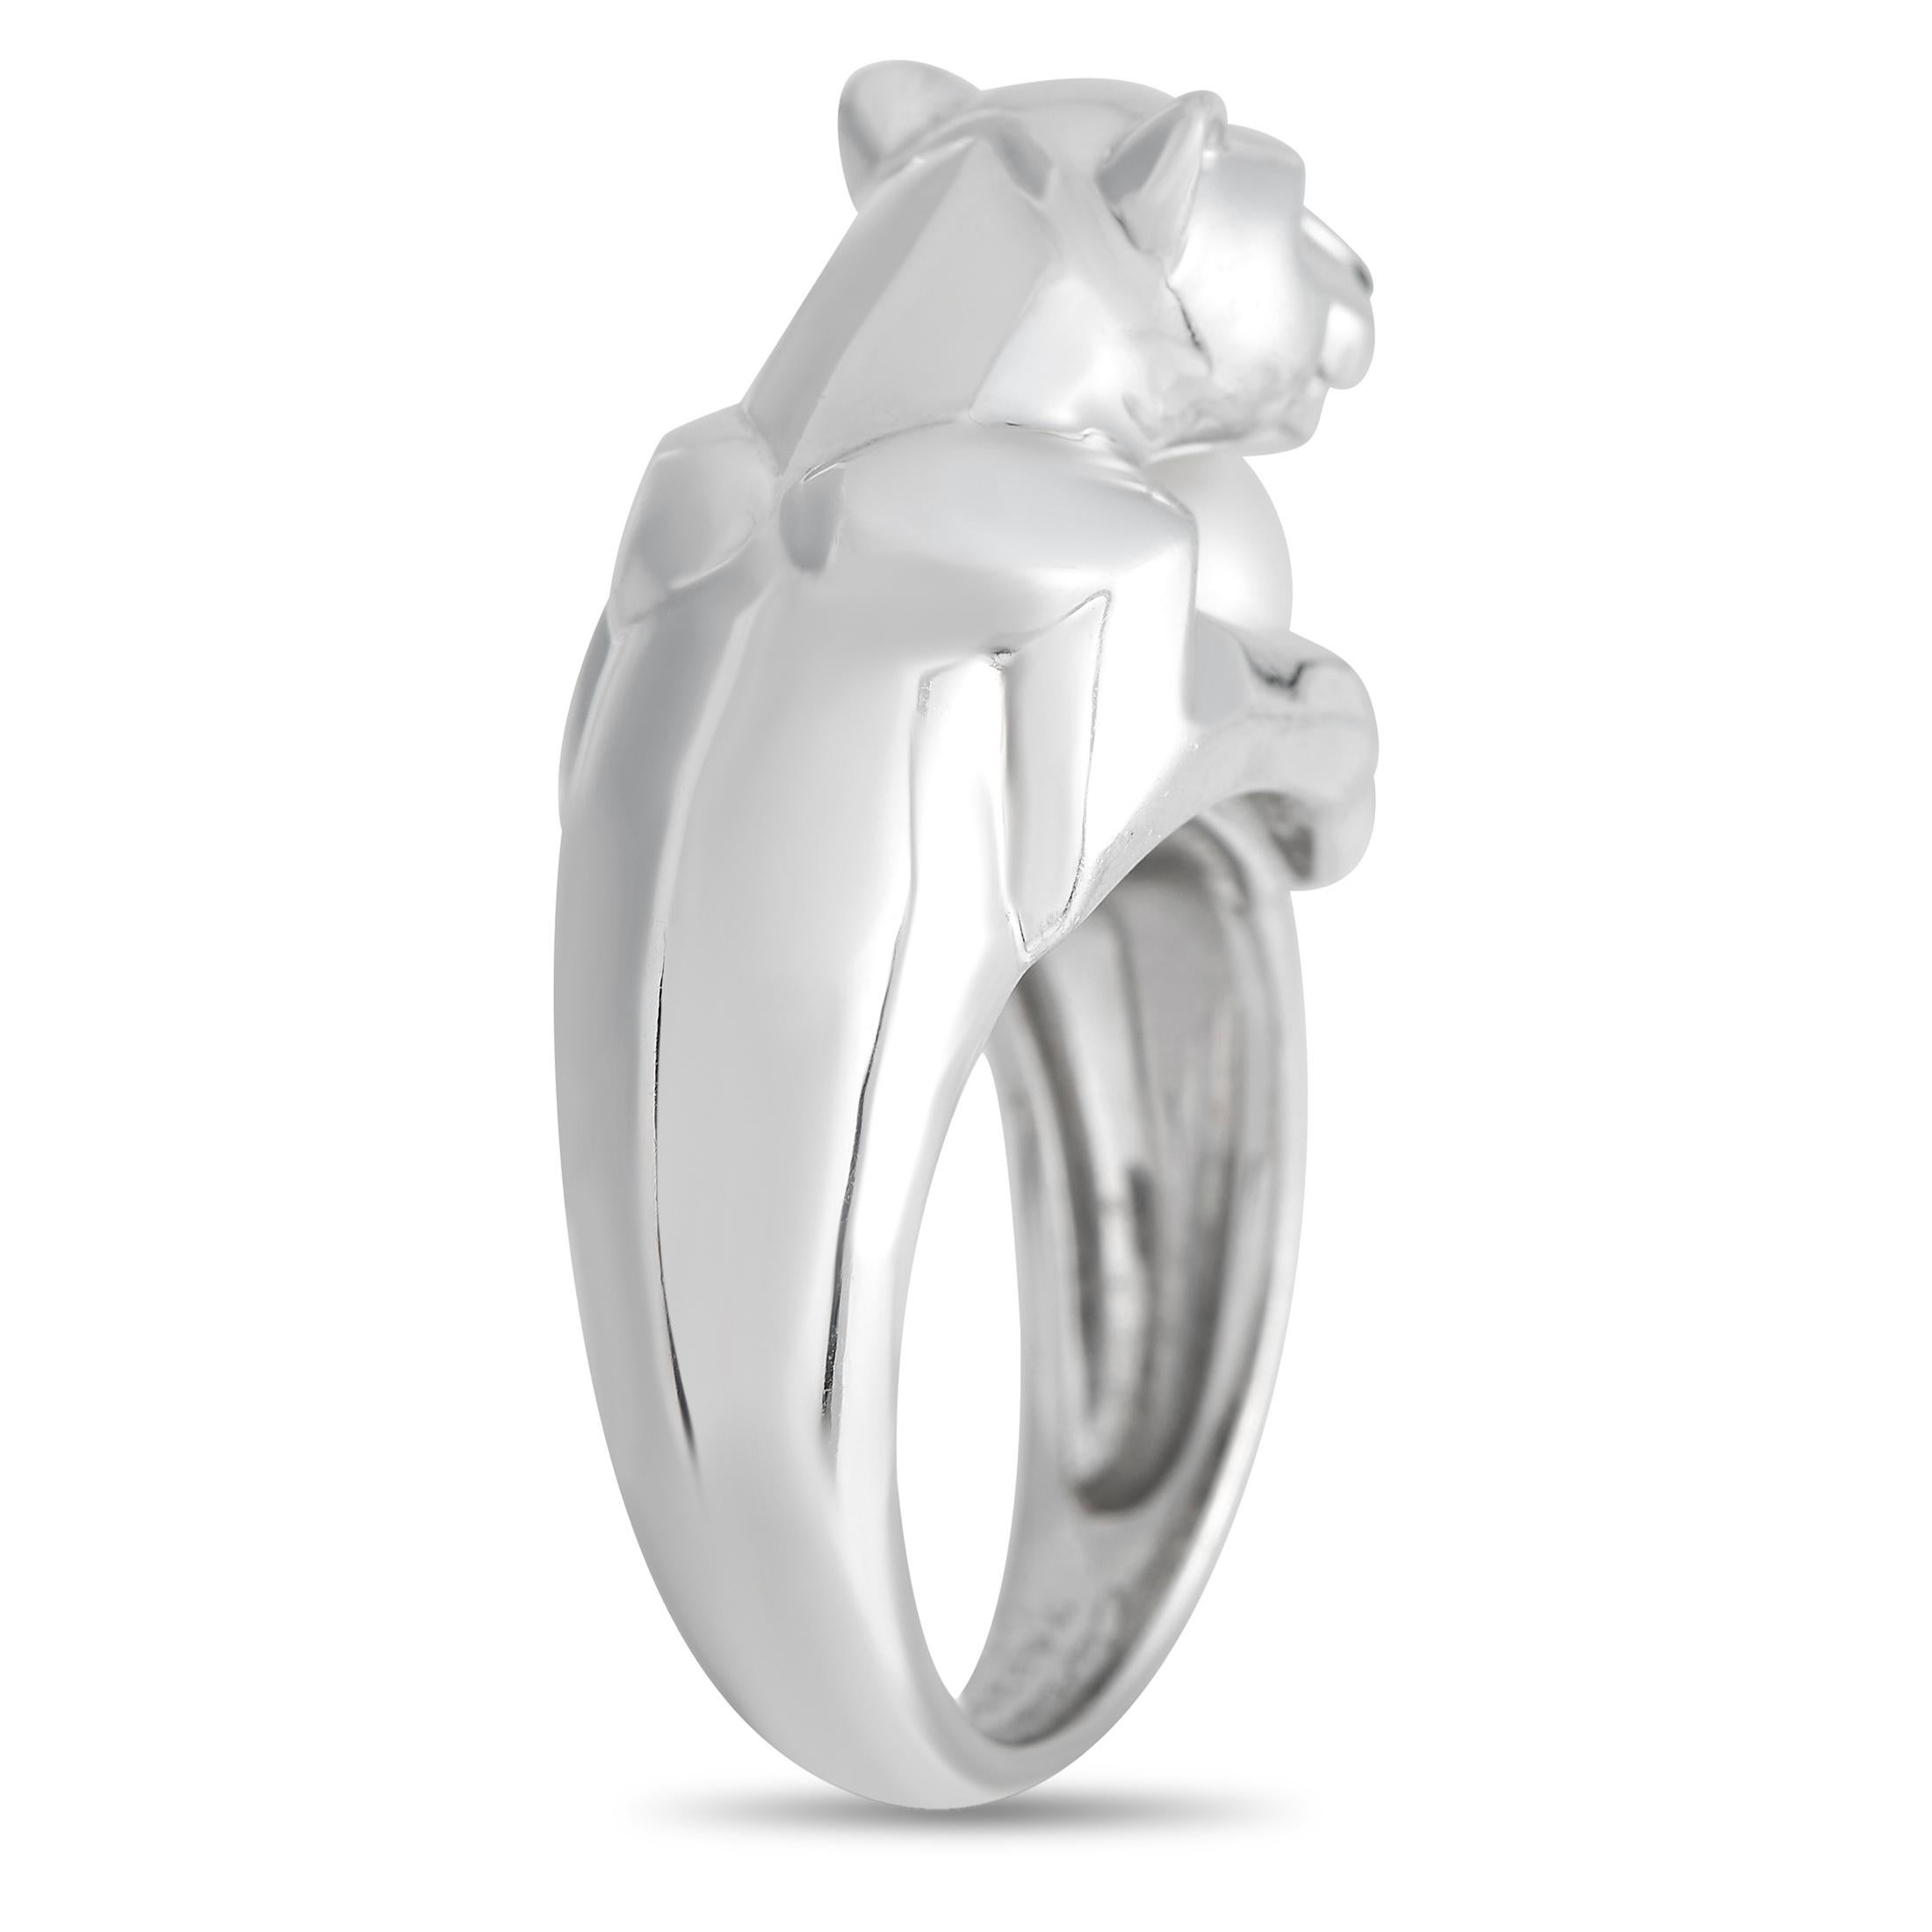 On this Cartier Panthere ring, the luxury brand\u2019s iconic panther motif plays with a sleek pearl orb. Crafted from 18K white gold, this piece features a 4mm wide band and a top height measuring 15mm.\r\nThis jewelry piece is offered in estate